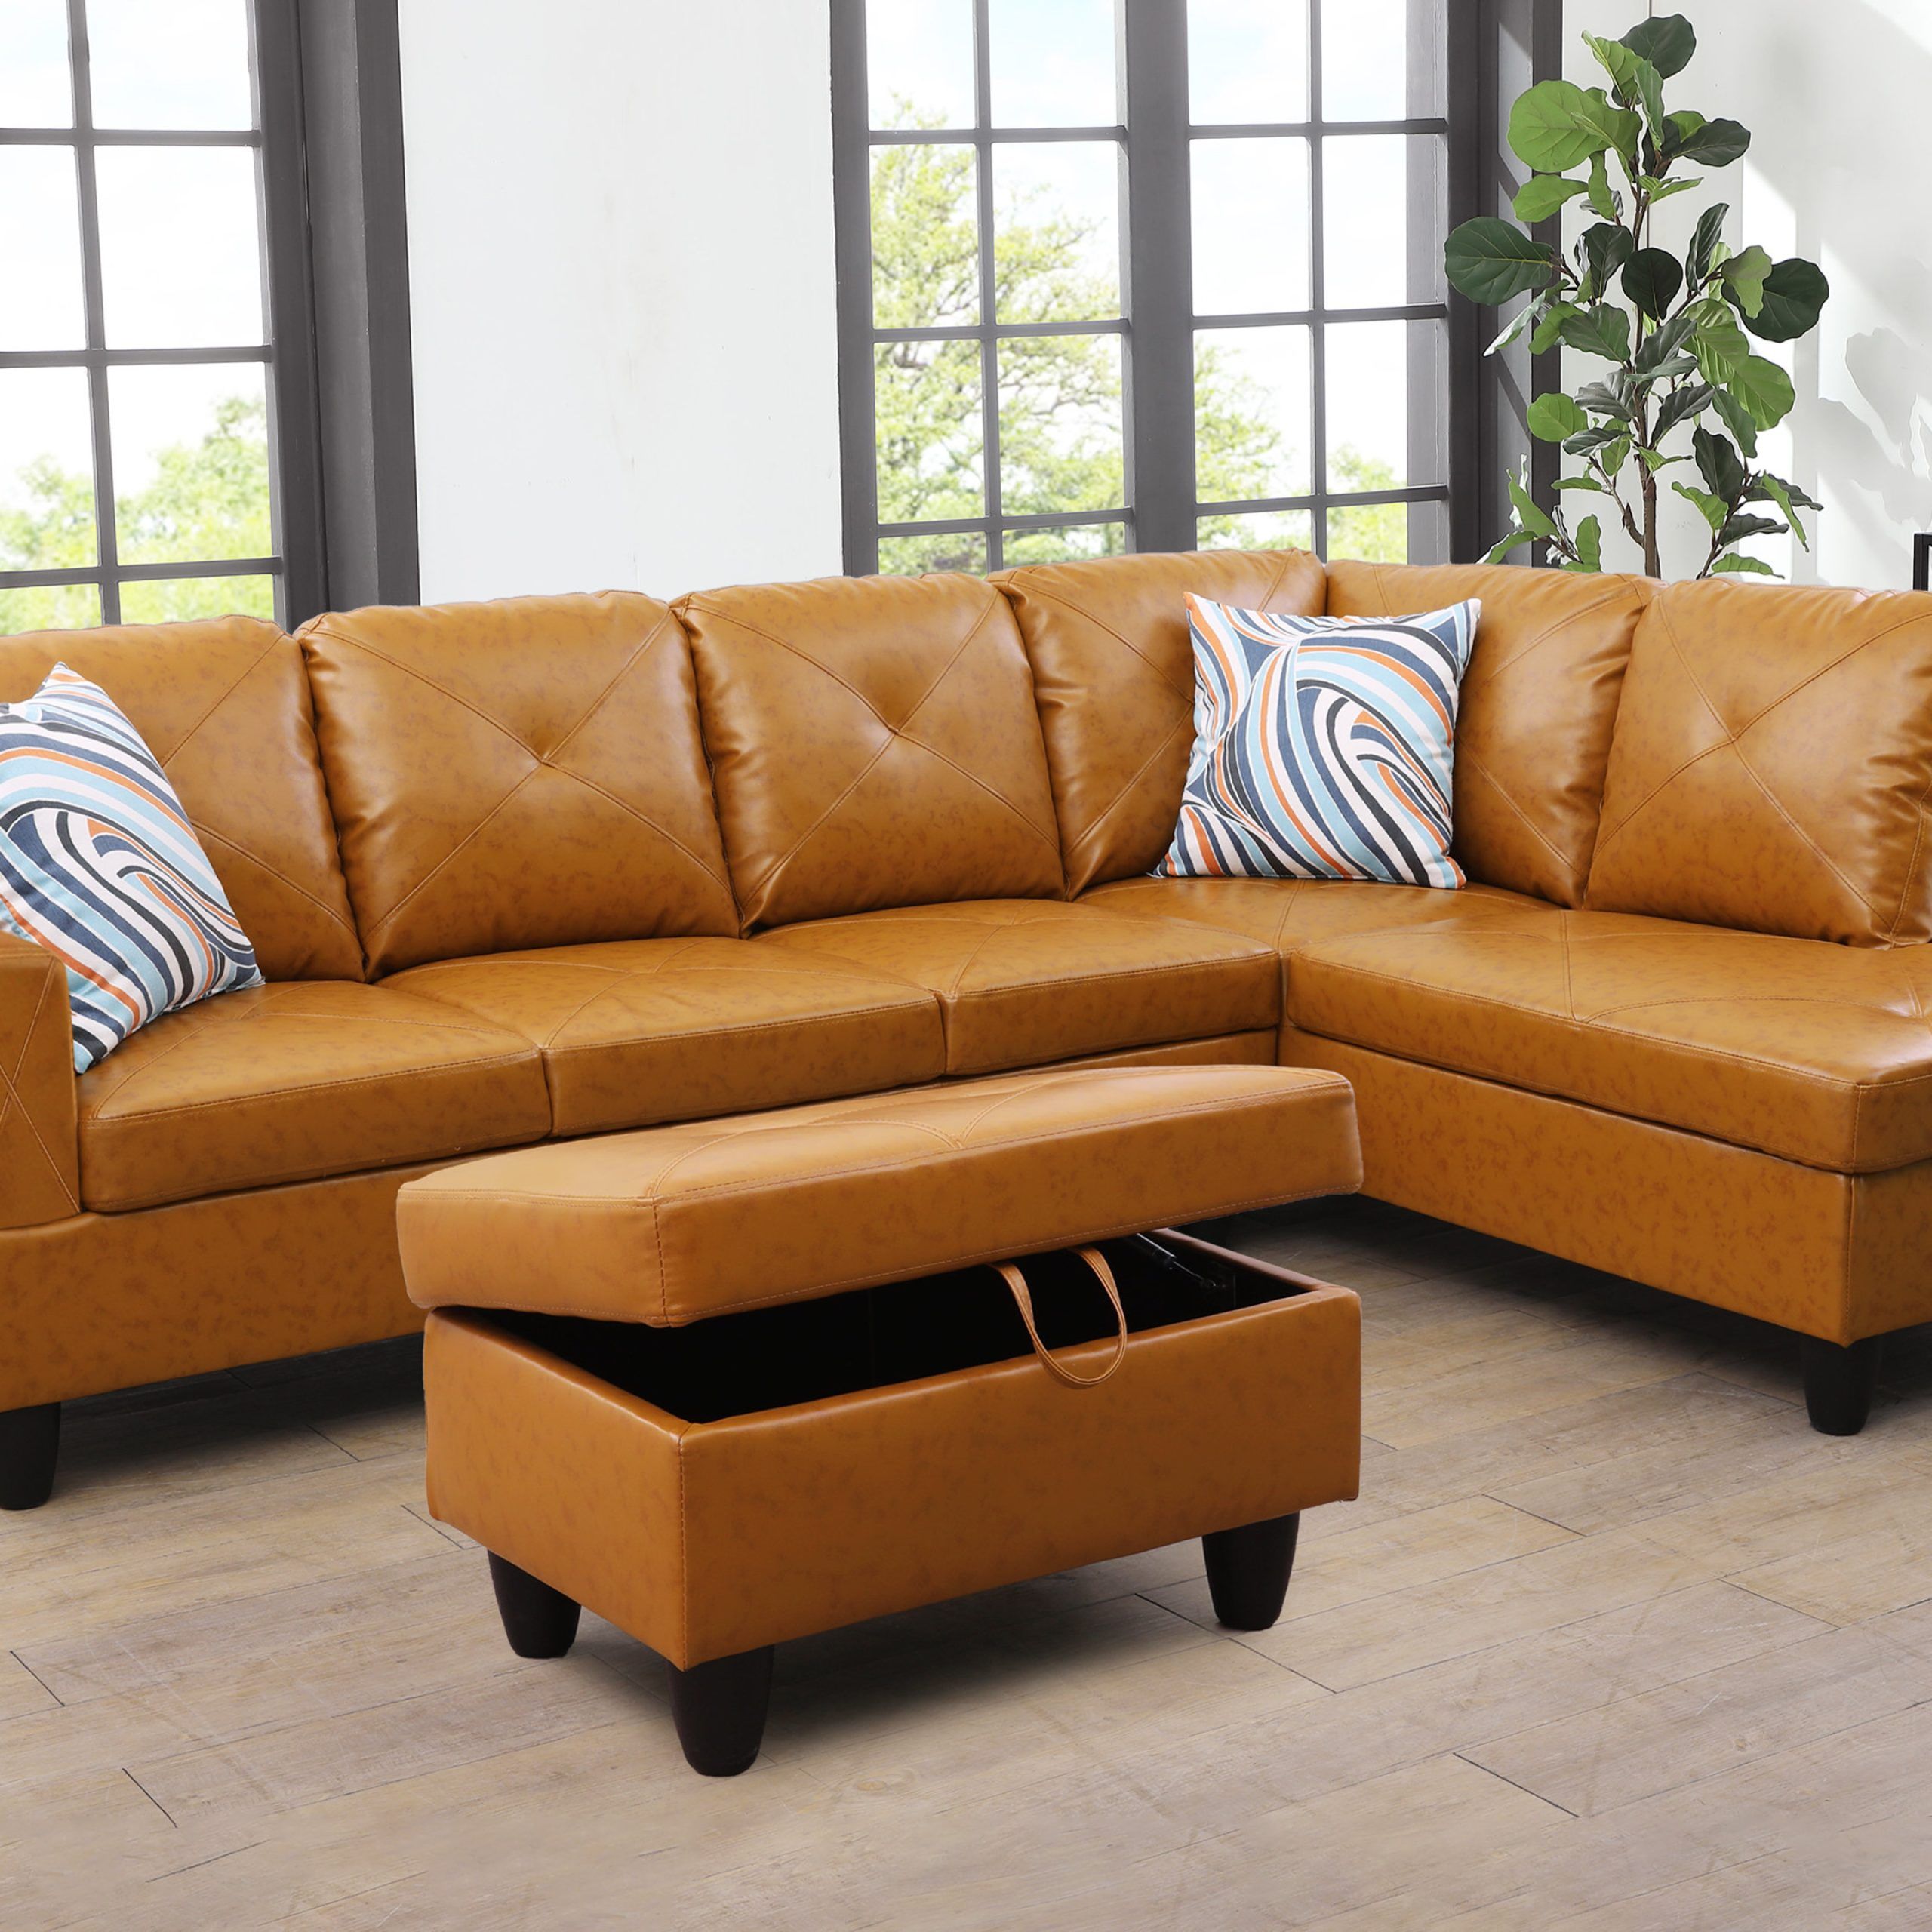 Ebern Designs 3 – Piece Vegan Leather Sectional & Reviews | Wayfair With 3 Piece Leather Sectional Sofa Sets (Photo 3 of 15)